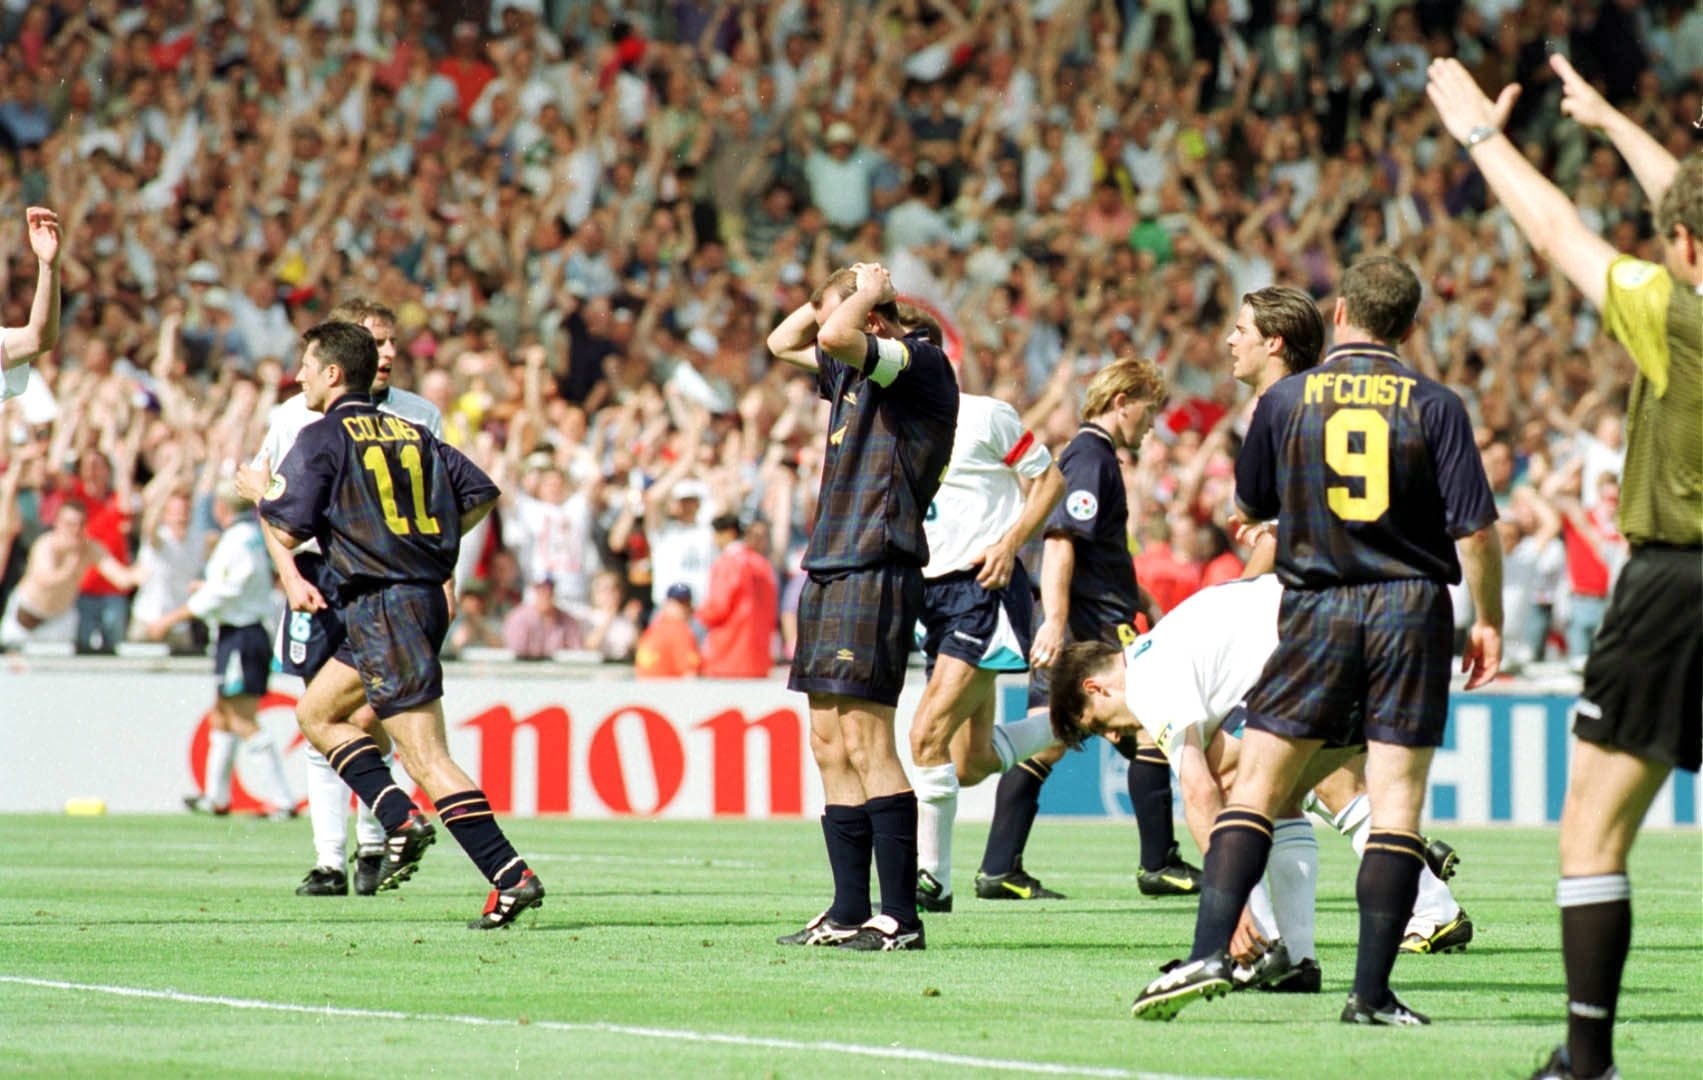 Euro 96: Scotland captain Gary McAllister hangs his head after seeing his penalty saved by David Seaman. Pic: Herald and Times